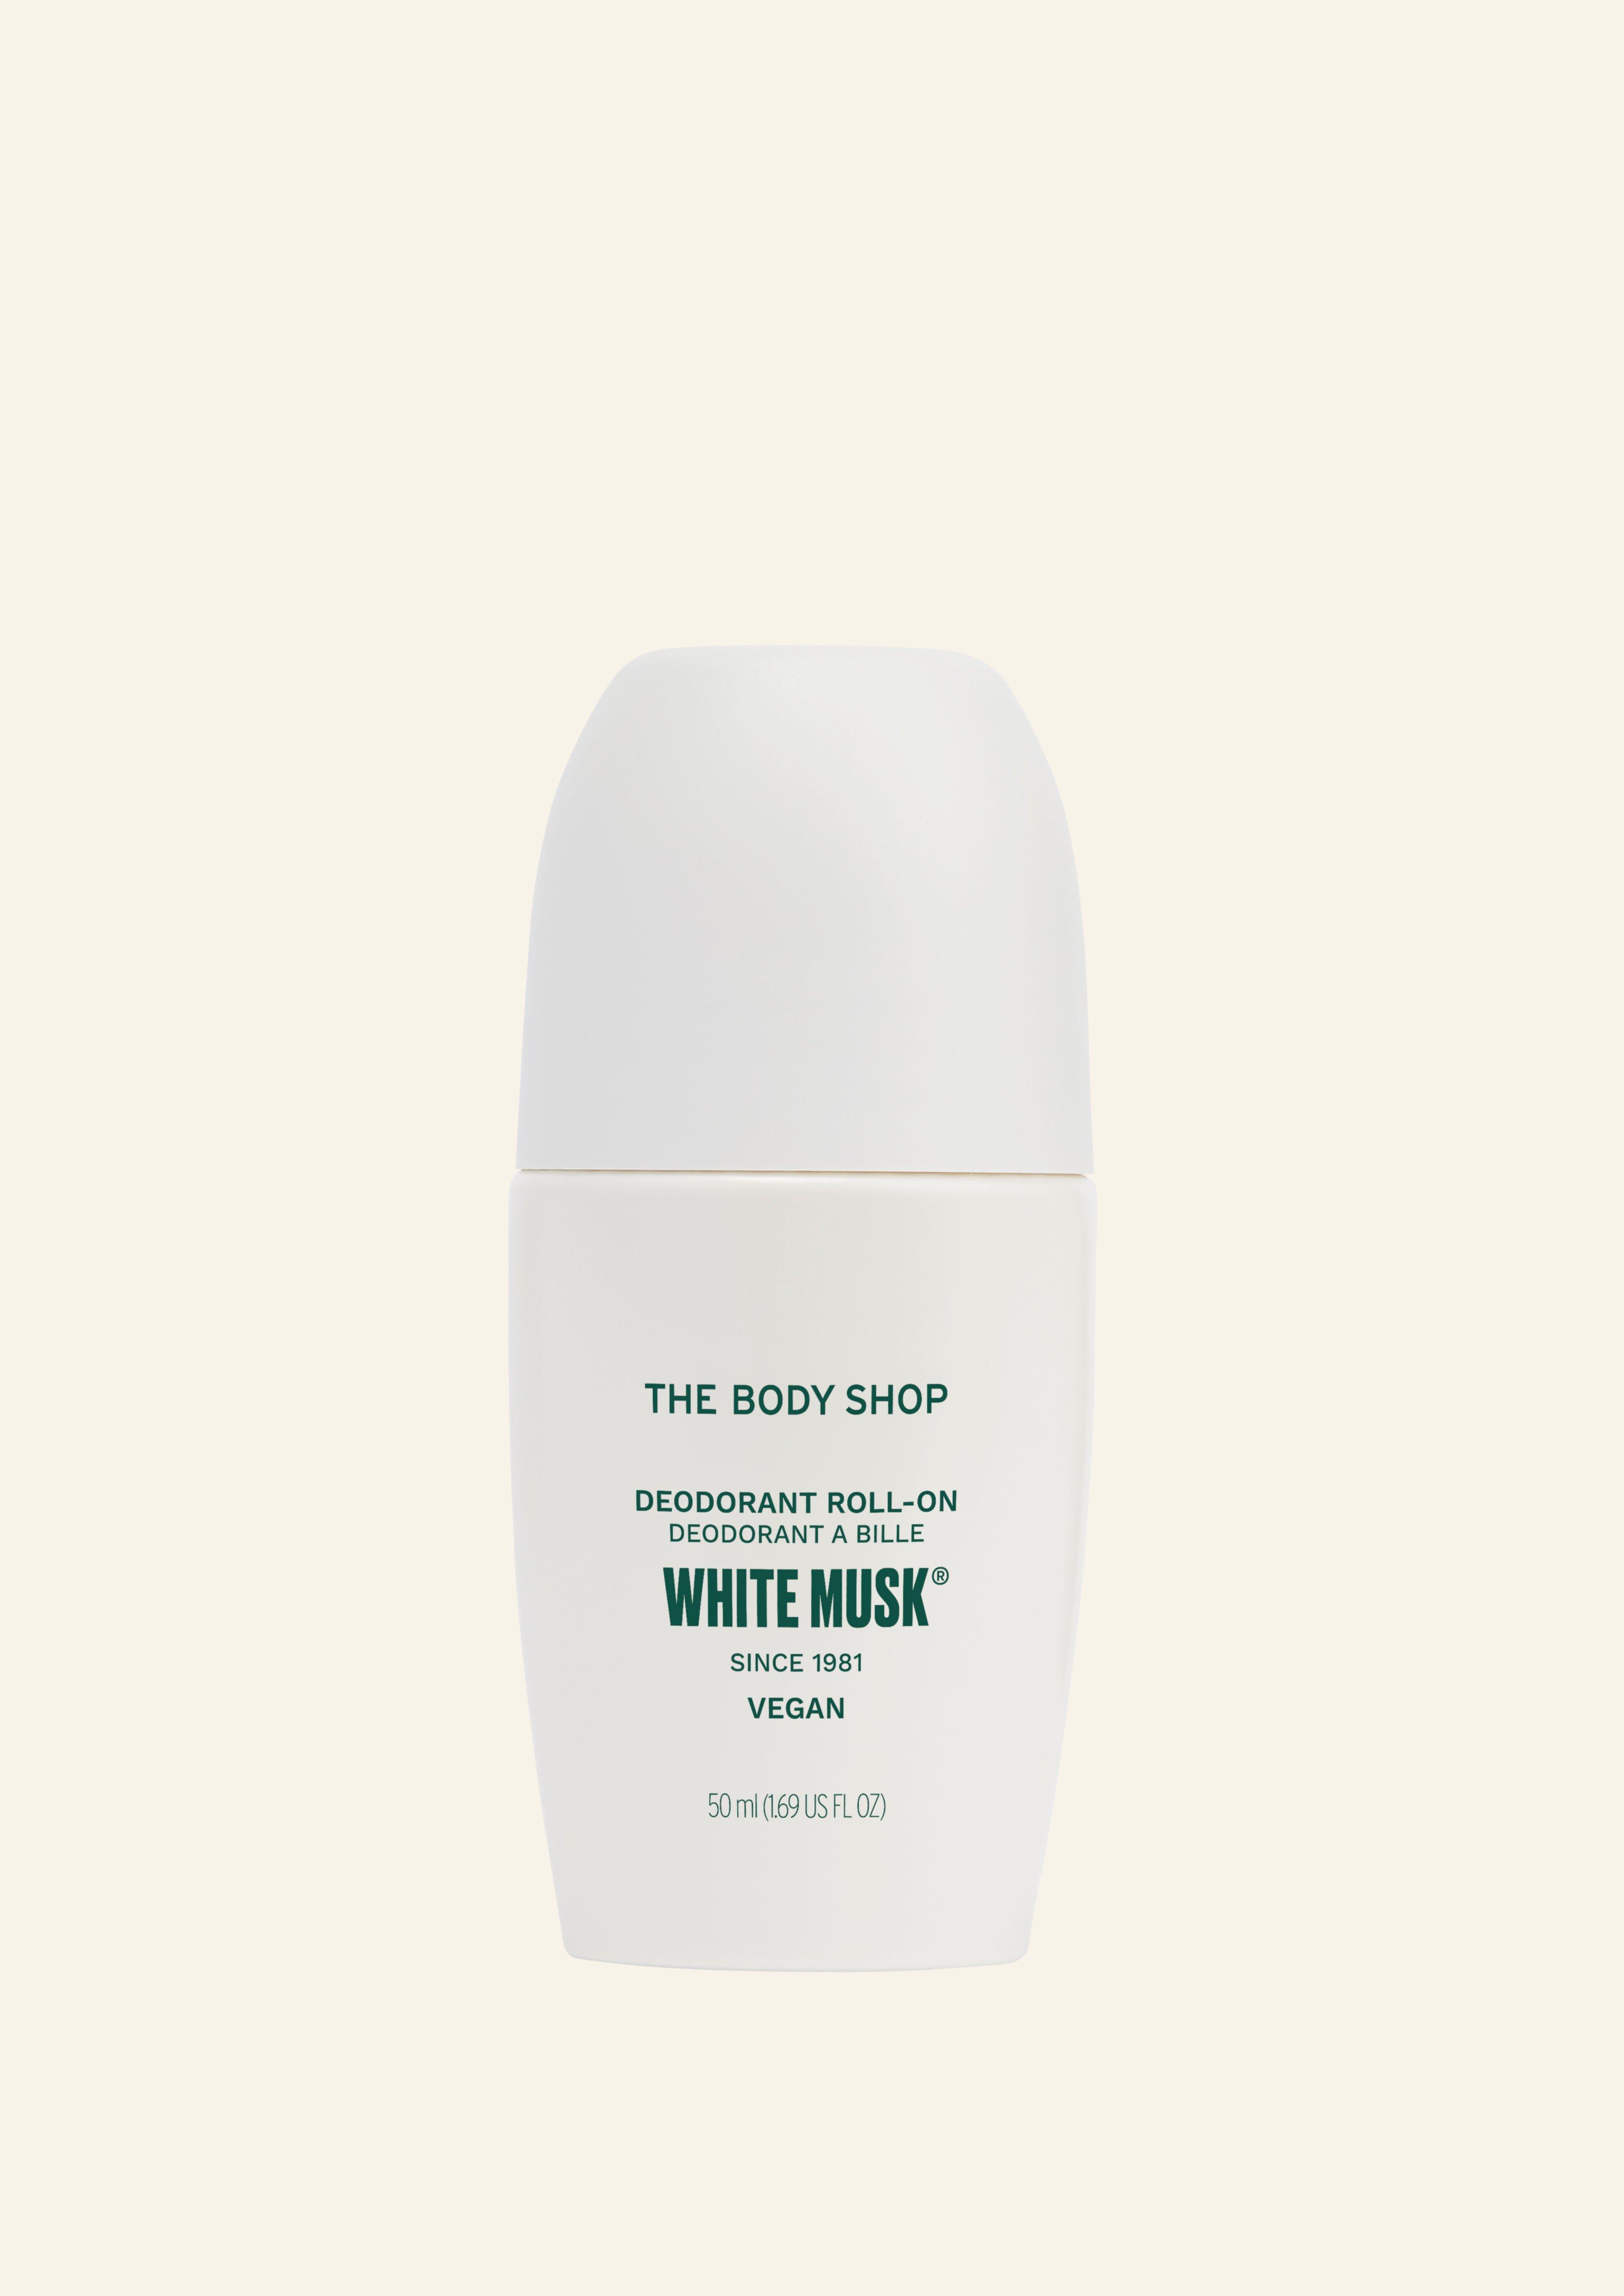 Perfumes & Fragrance Products | The Body Shop®